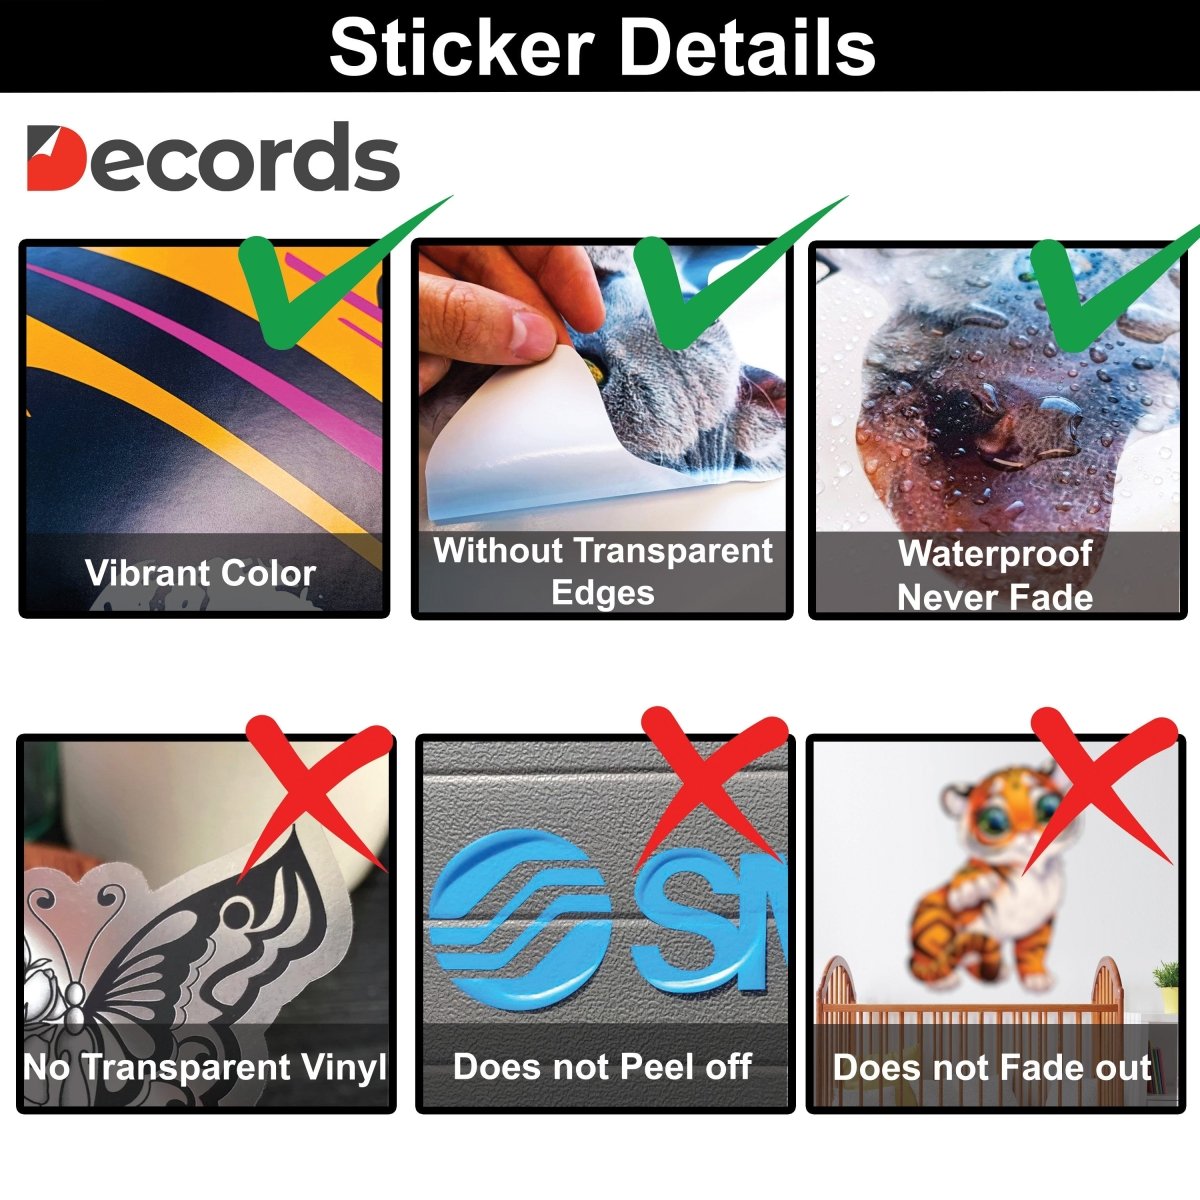 Egg Allergy Safety Stickers: Stay Allergy-Free and Raise Awareness! - Decords